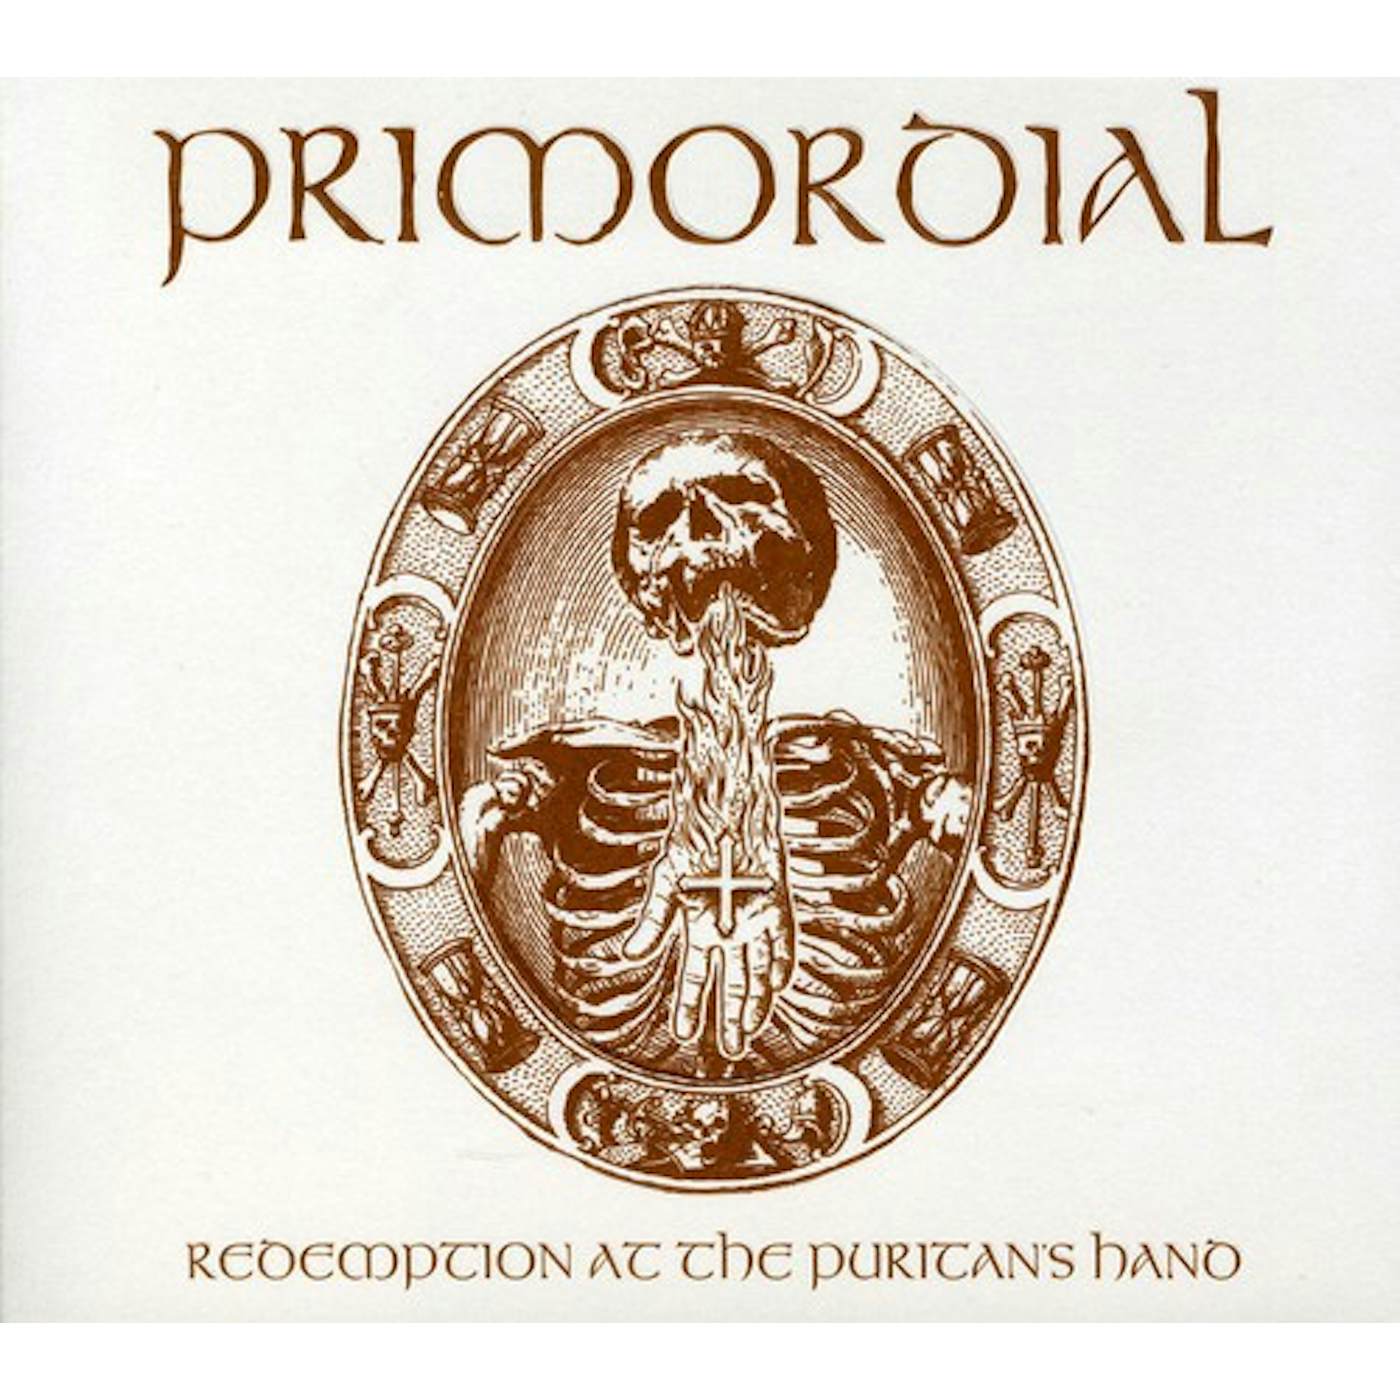 Primordial REDEMPTION AT THE PURITANS HAND: LIMITED CD